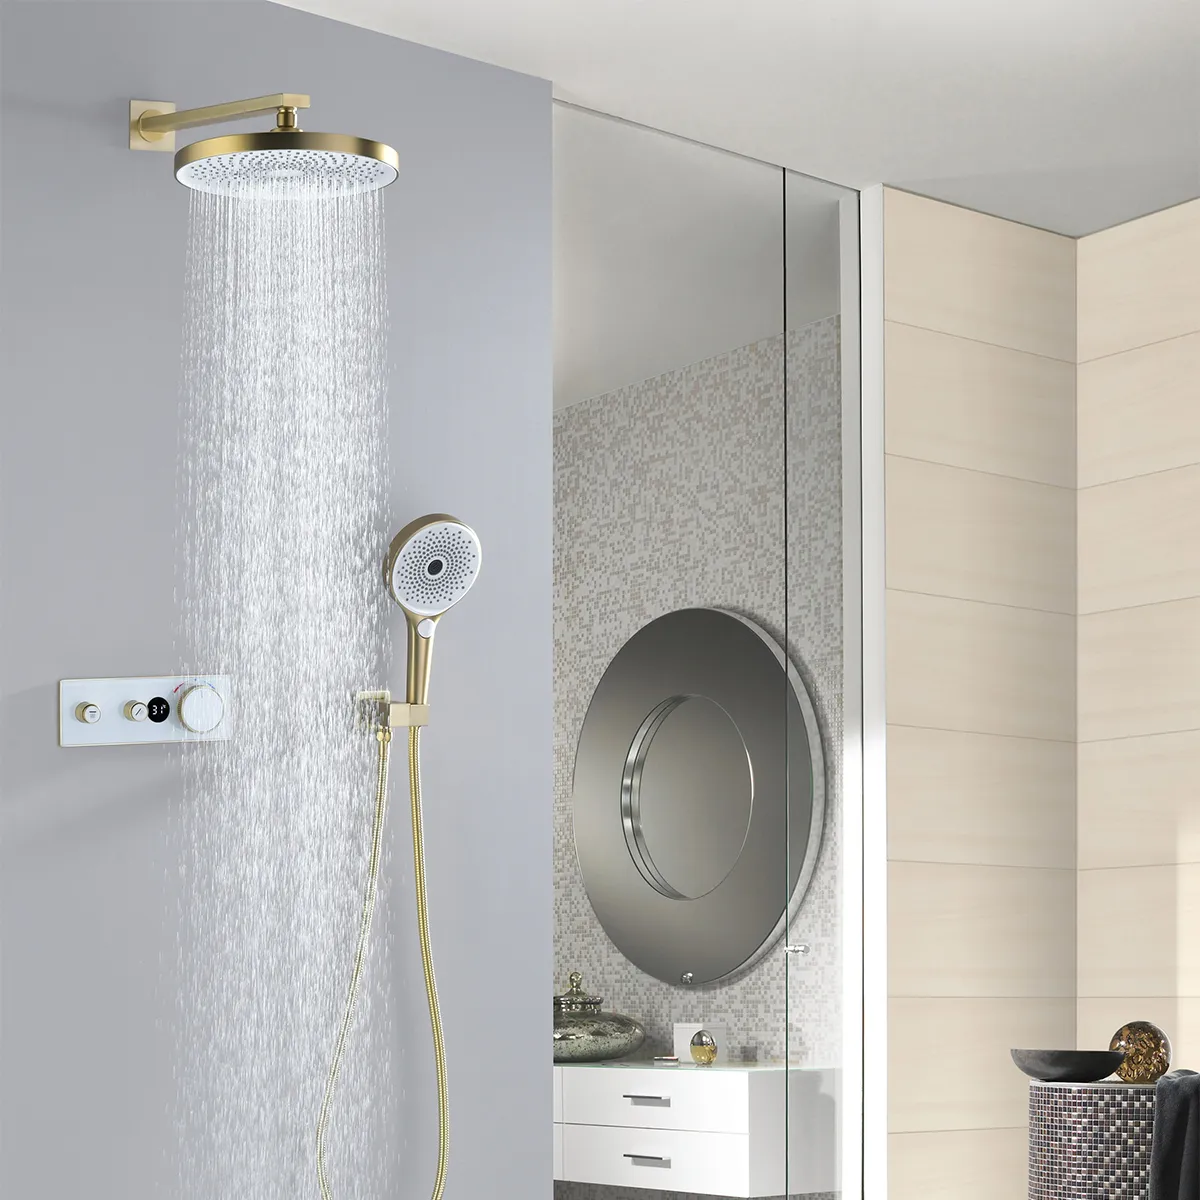 Is ceiling rain shower system suitable for small bathrooms